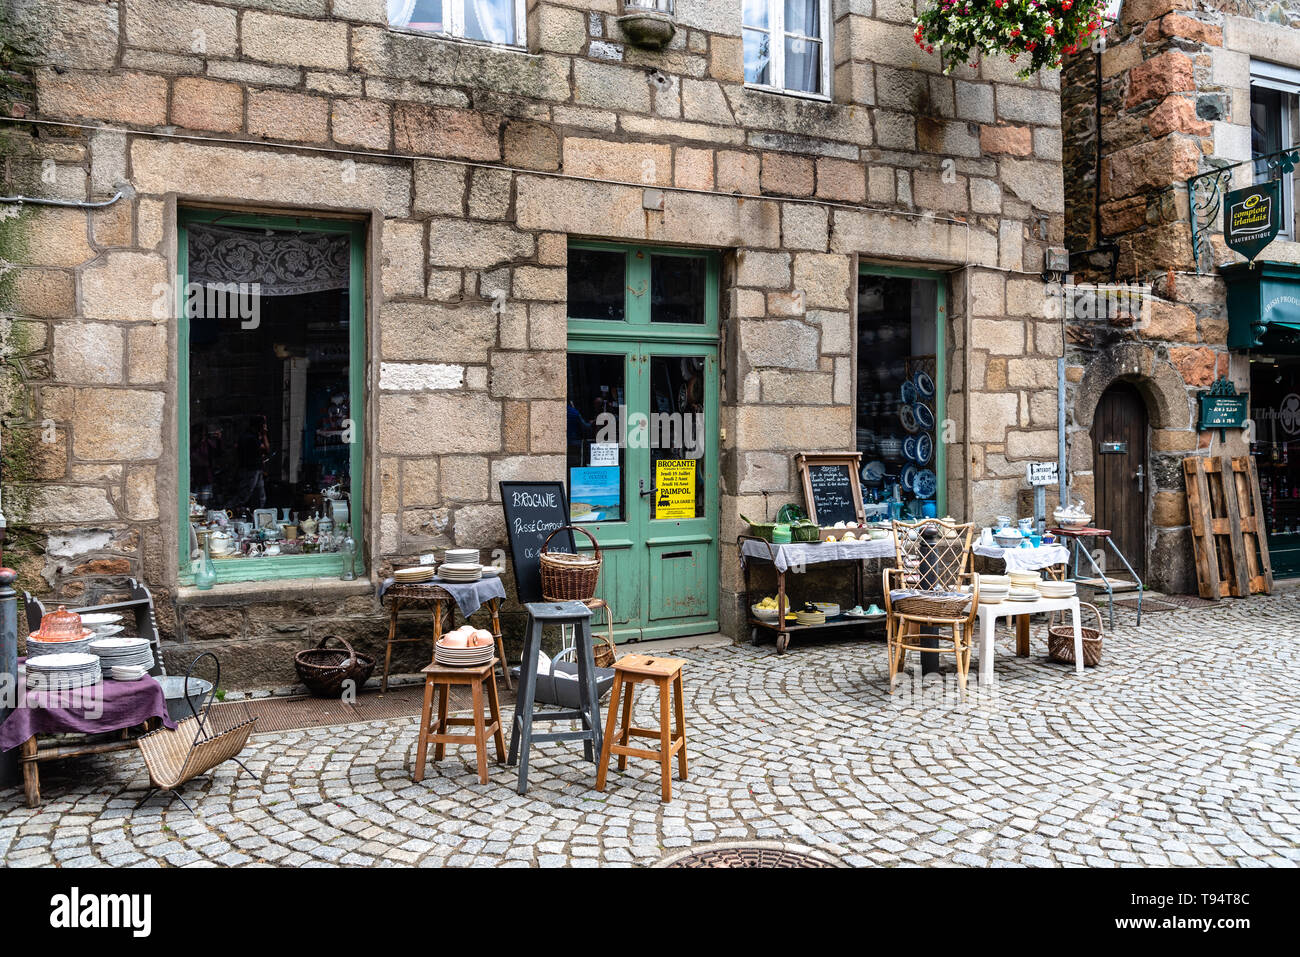 Paimpol, France - July 28, 2018: Antique store in the old town of Paimpol, Brittany Stock Photo